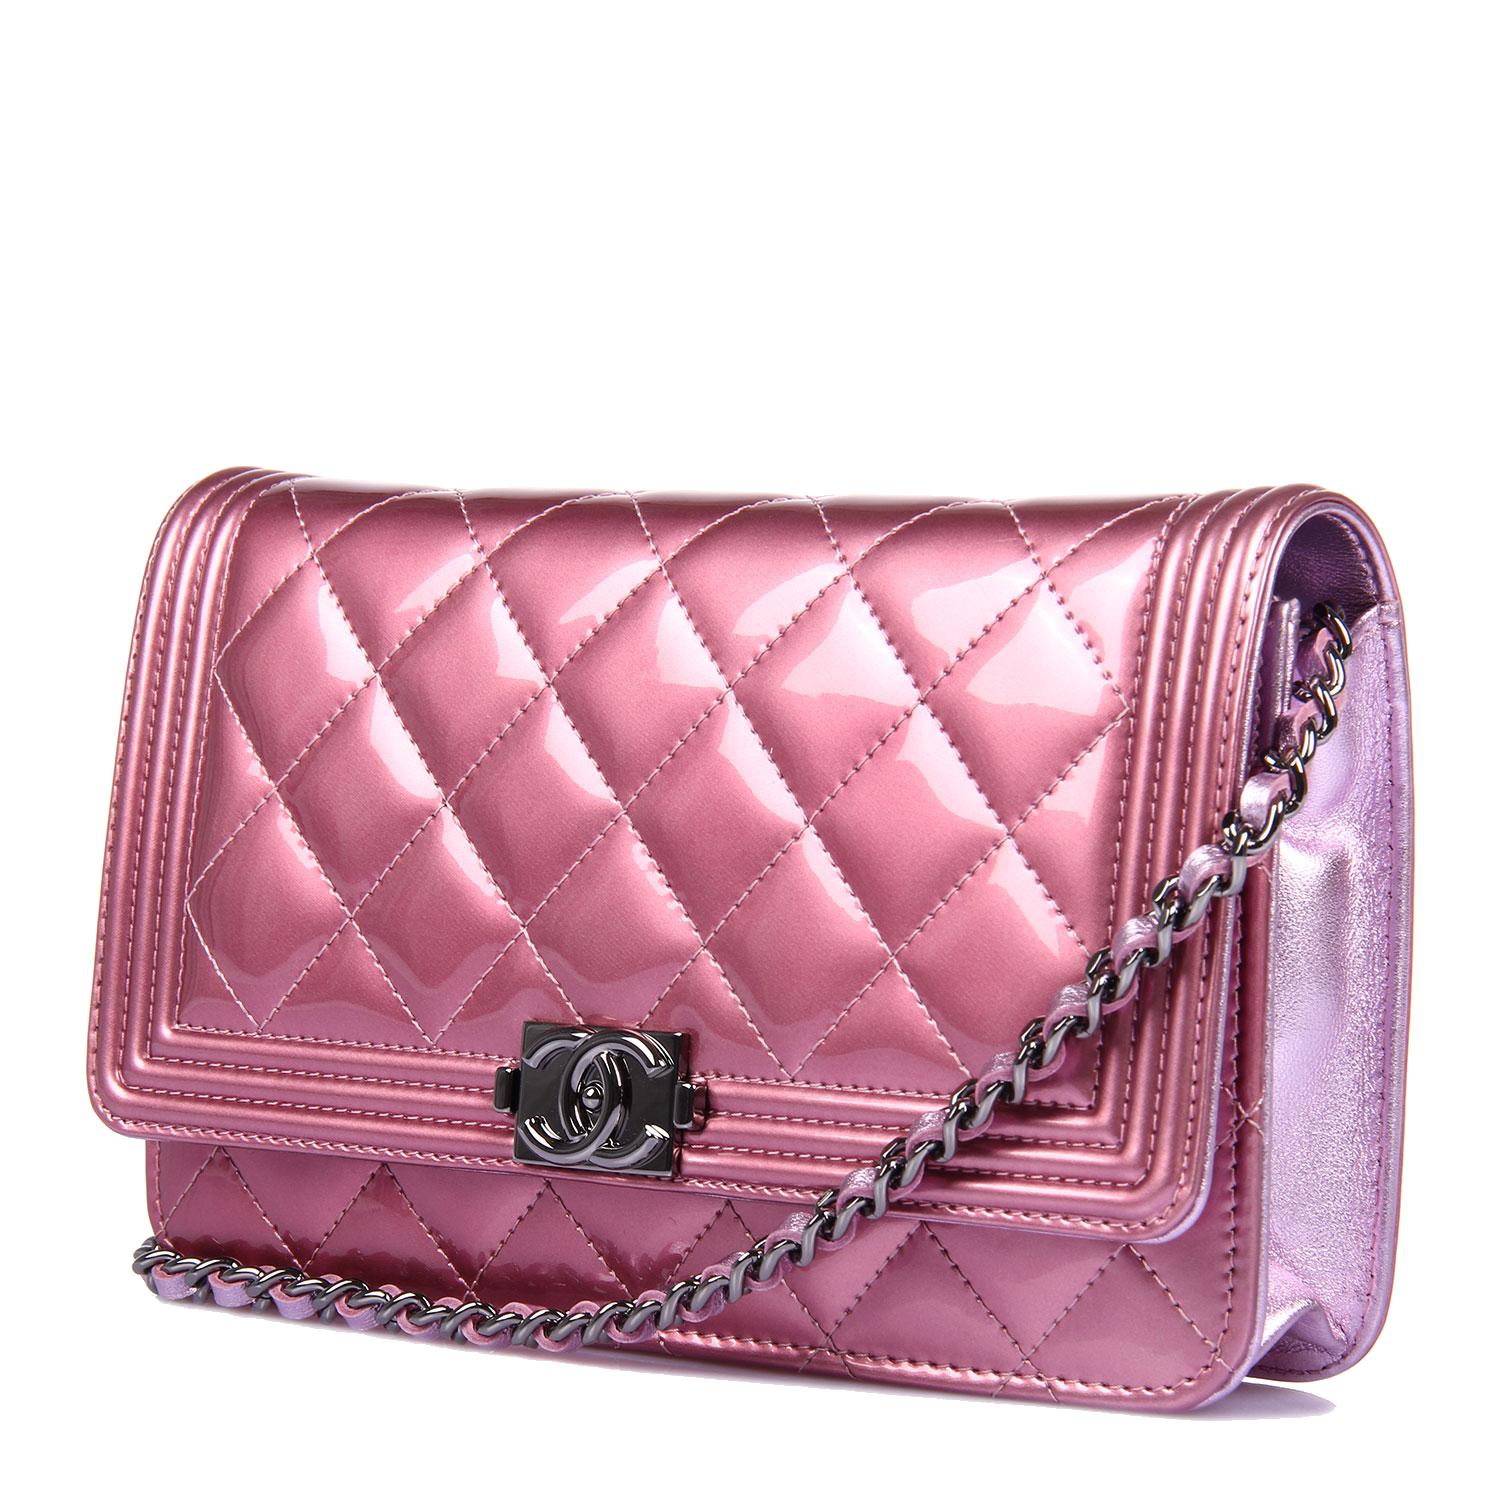 Pearl bag leather crossbody bag Chanel Pink in Leather - 33202592